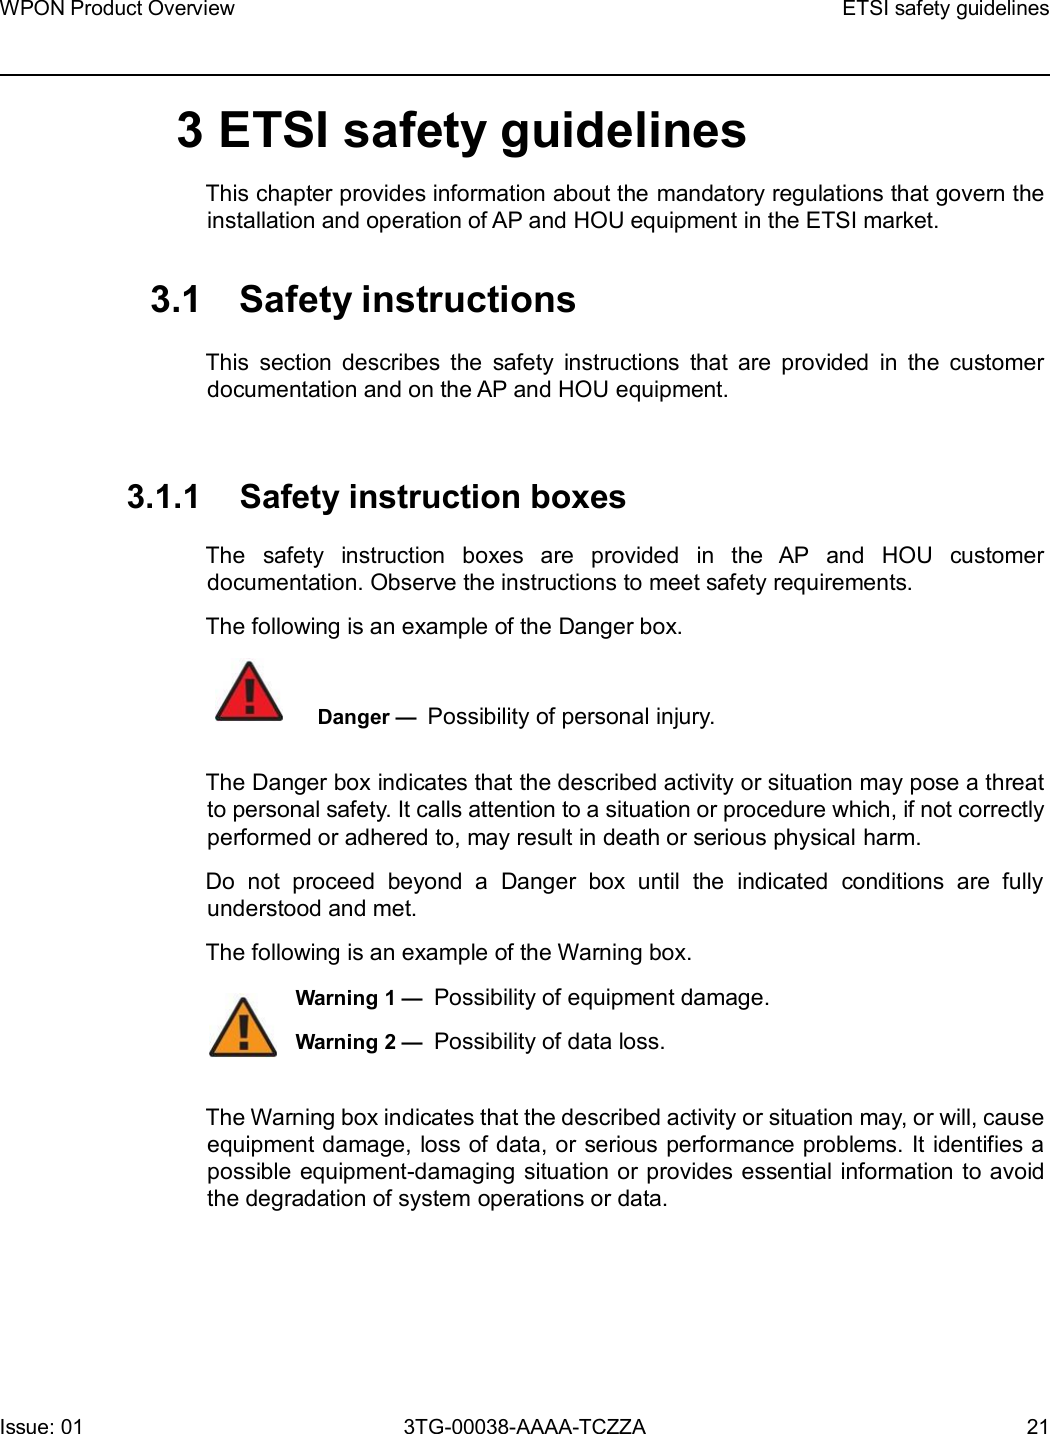 Page 21 of Nokia Bell 7577WPONAPAC WPON User Manual WPON Product Overview